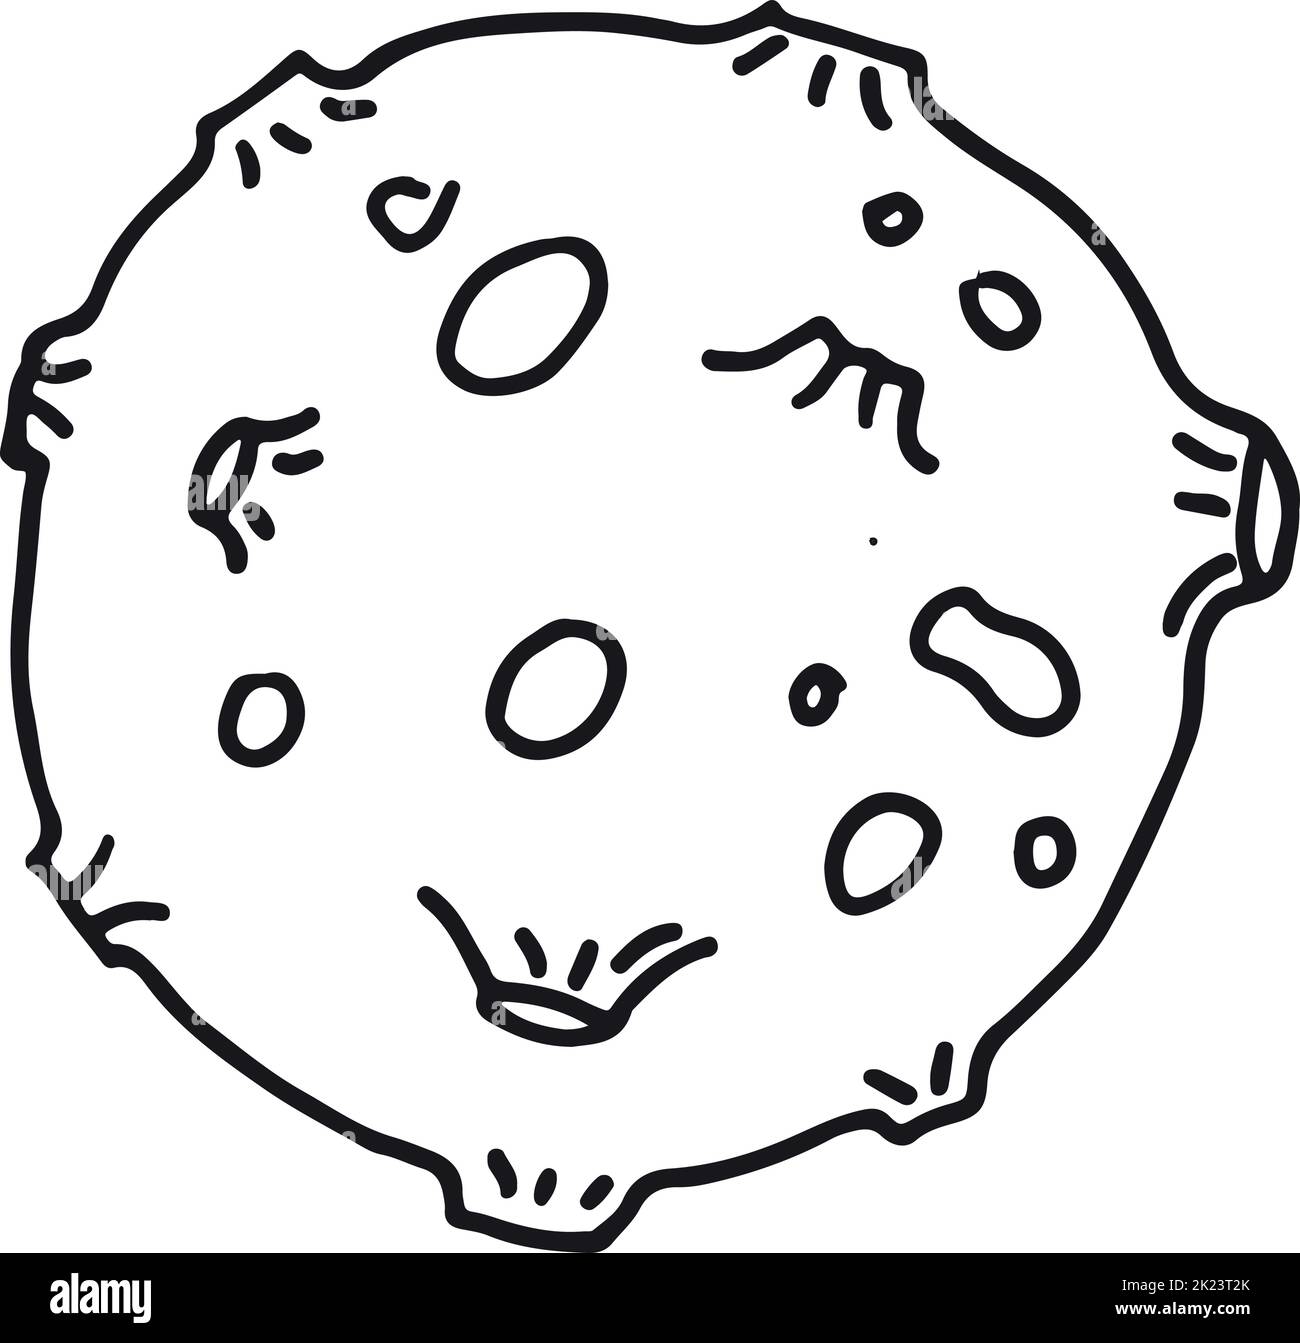 Asteroid doodle. Space rock with craters in line style Stock Vector